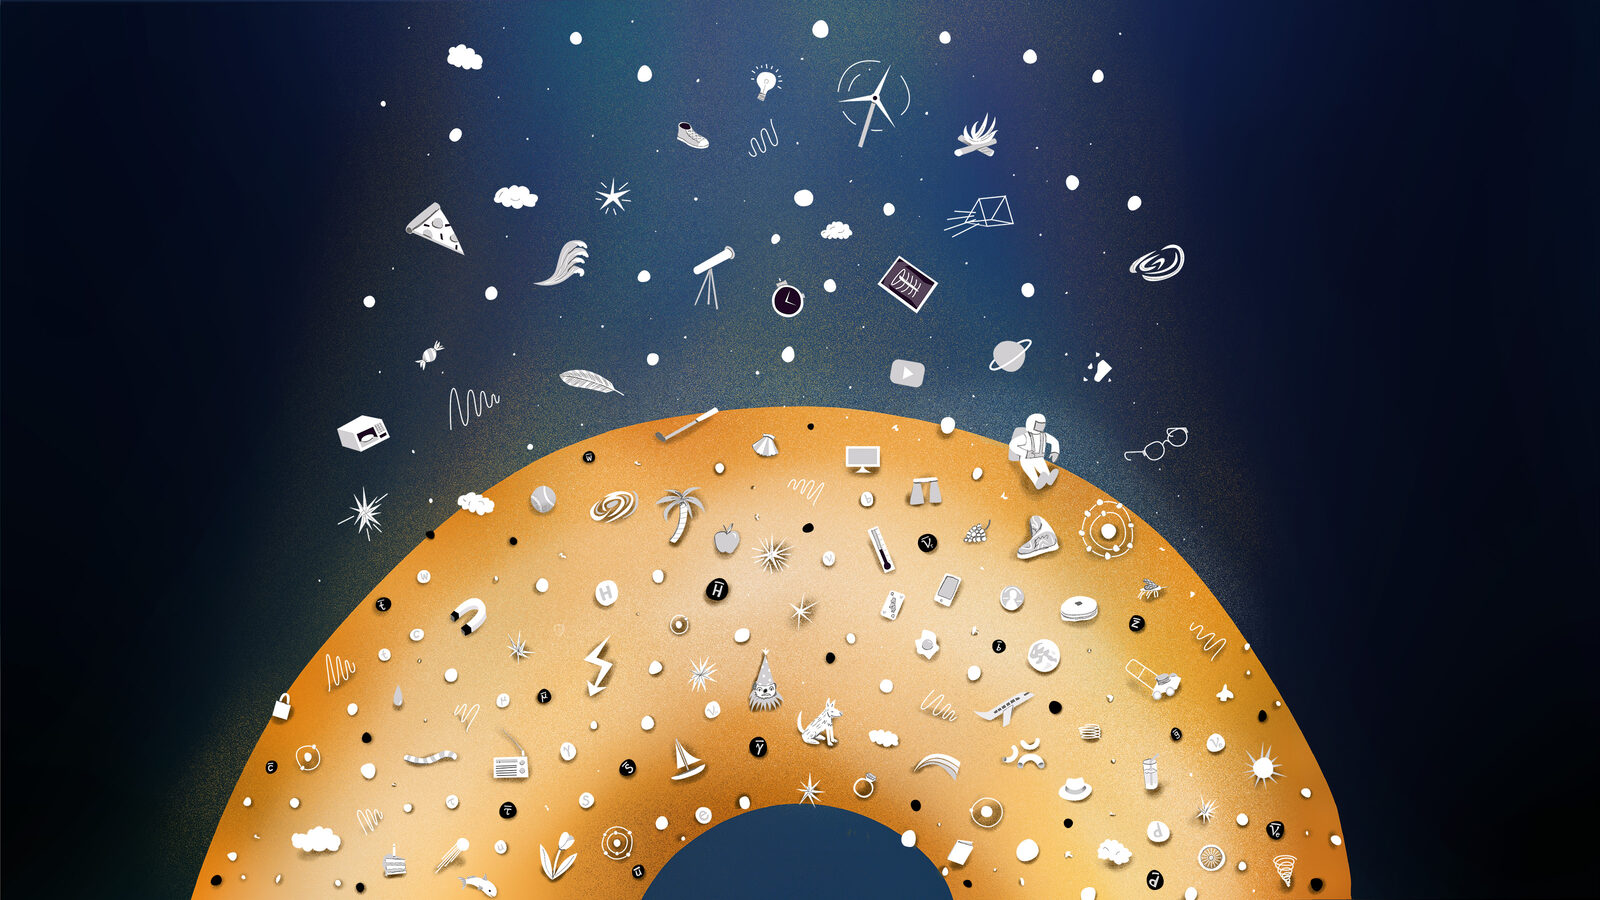 Illustration of a bagel with different objects sprinkling onto its surface like toppings on an "everything" bagel